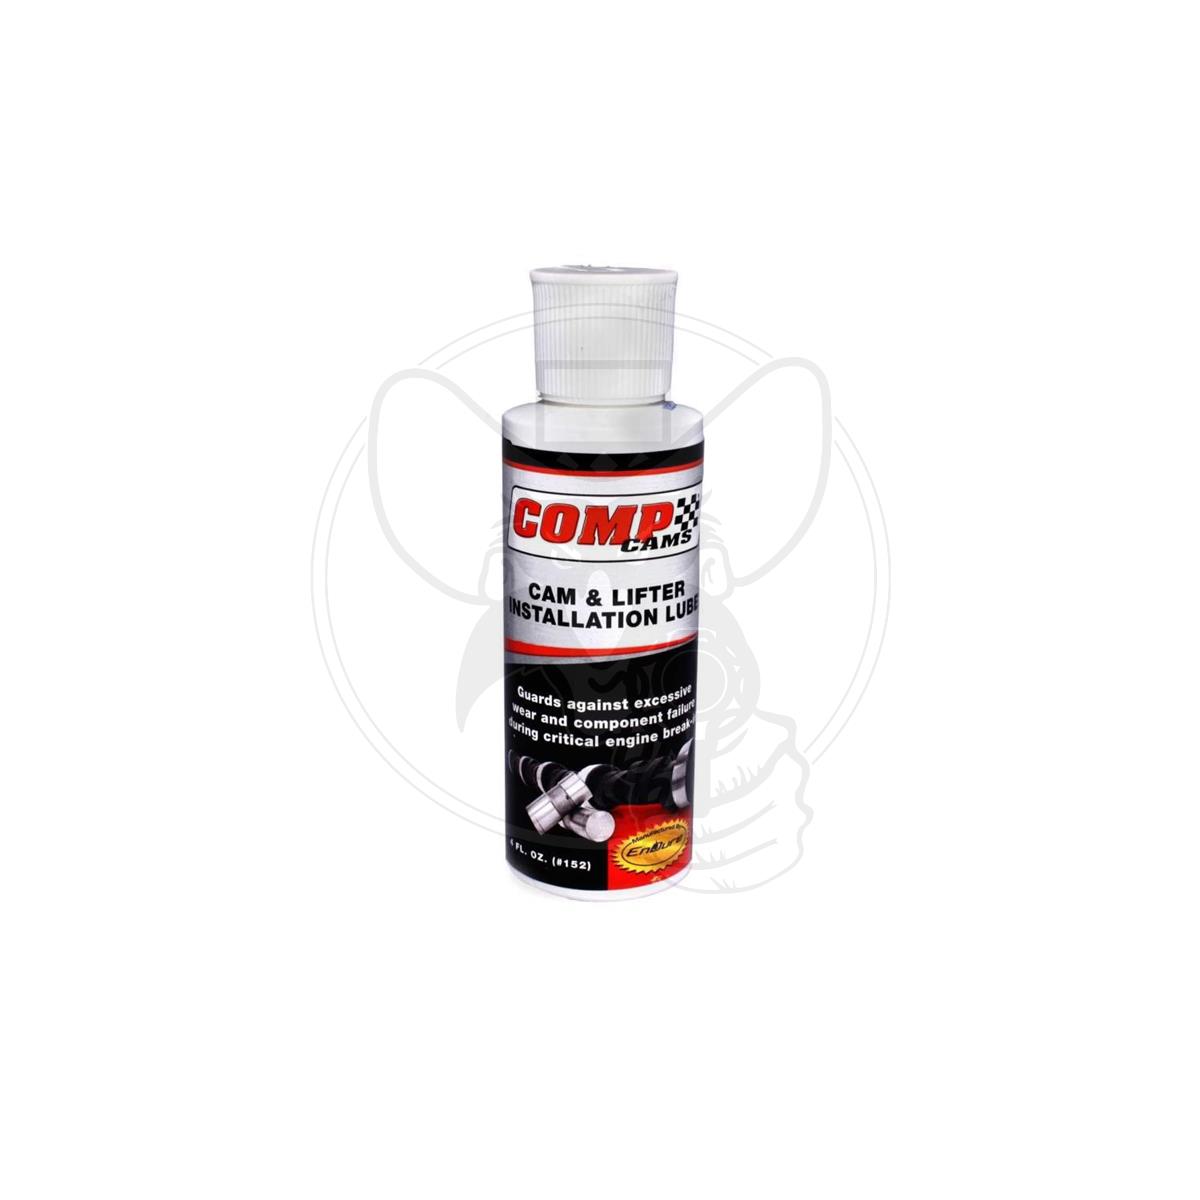 COMP CAMS CAM & LIFTER INSTALLATION LUBE 4 OUNCE BOTTLE